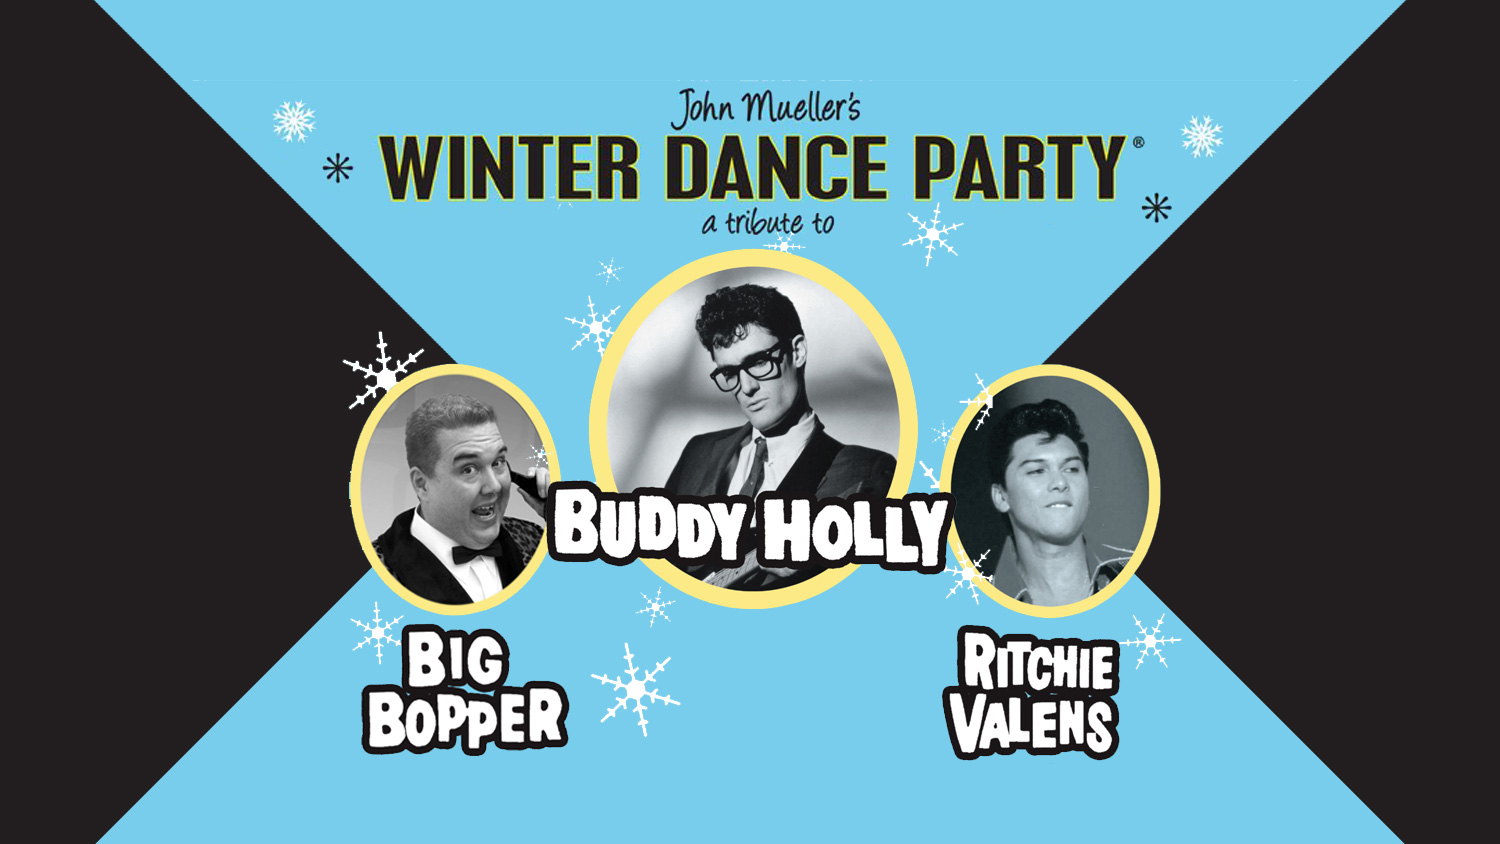 Composite John Mueller's Winter Dance Party with singers Buddy Holly, Big Bopper, and Ritchie Valens